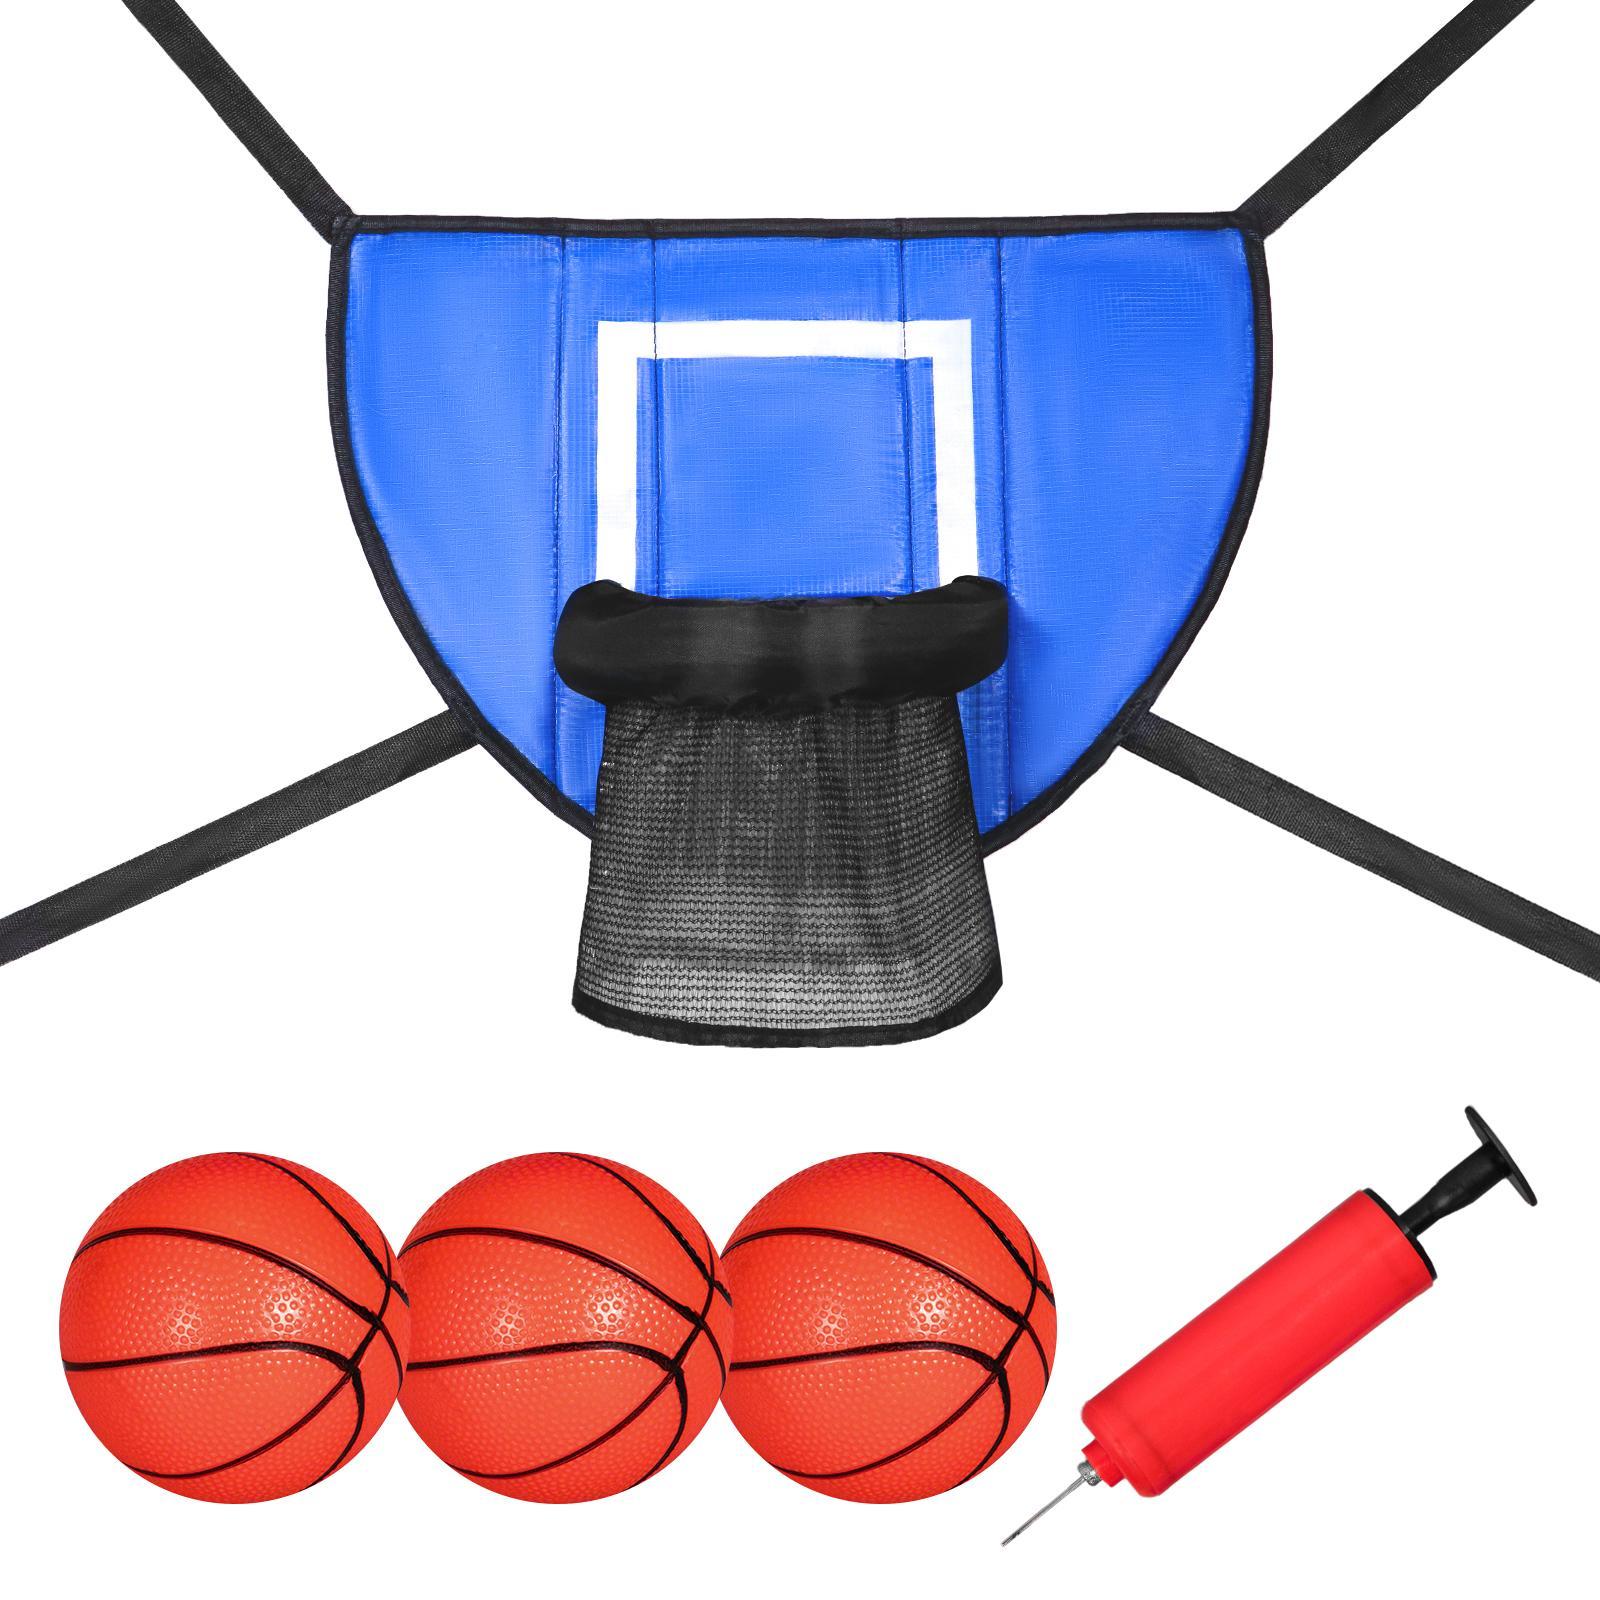 Mini Trampoline Basketball Hoop Goal Game Trampoline Accessory for All Ages